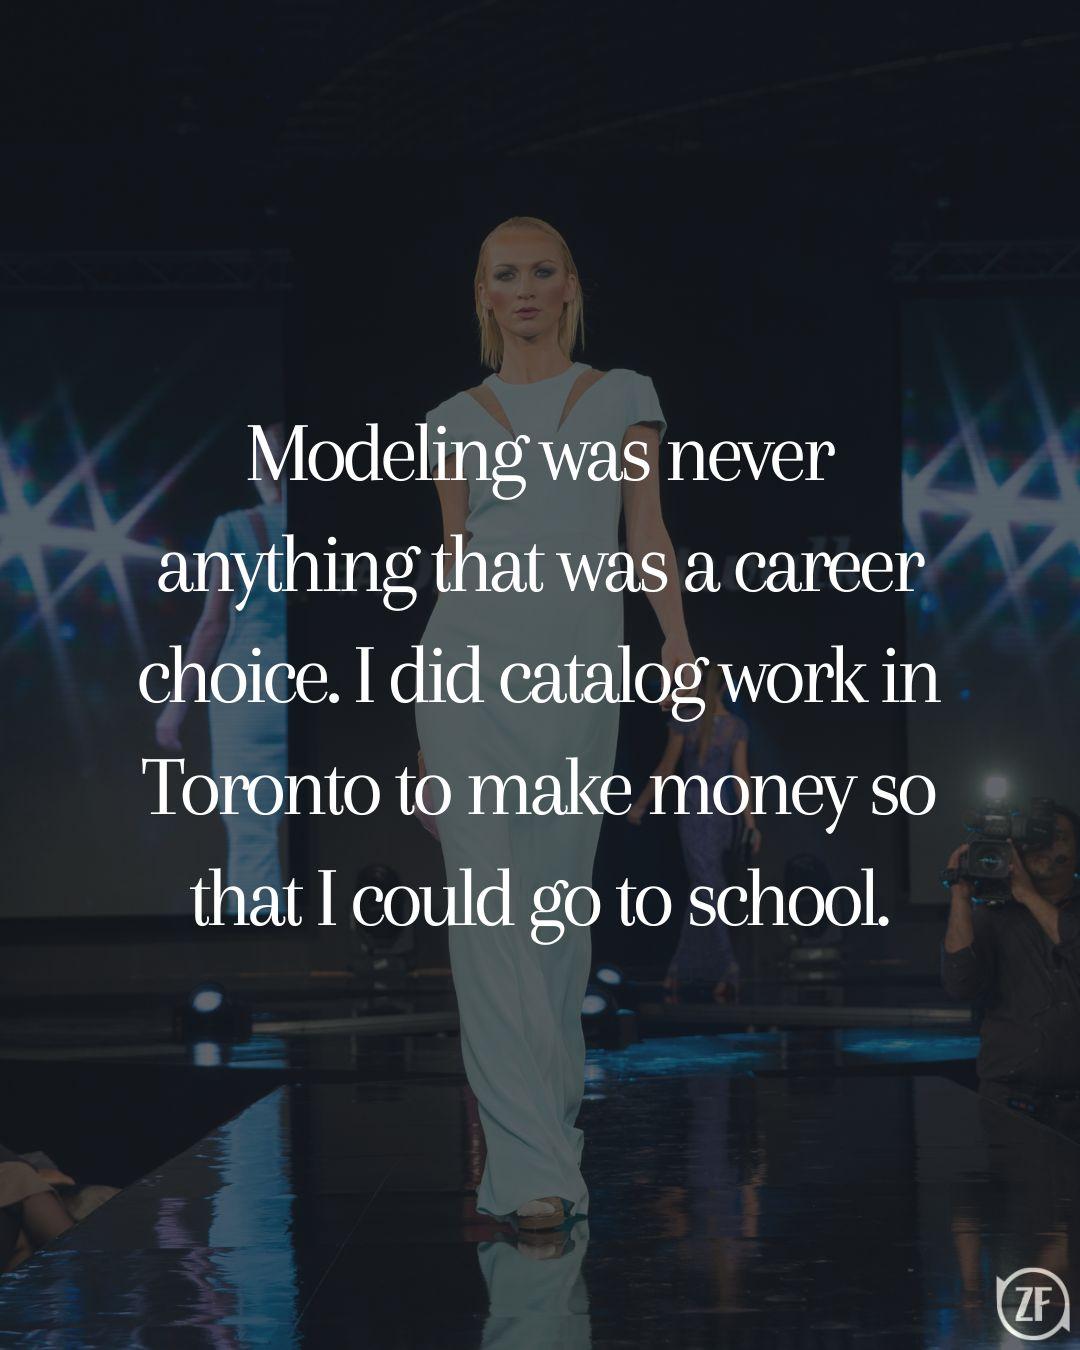 Modeling was never anything that was a career choice. I did catalog work in Toronto to make money so that I could go to school